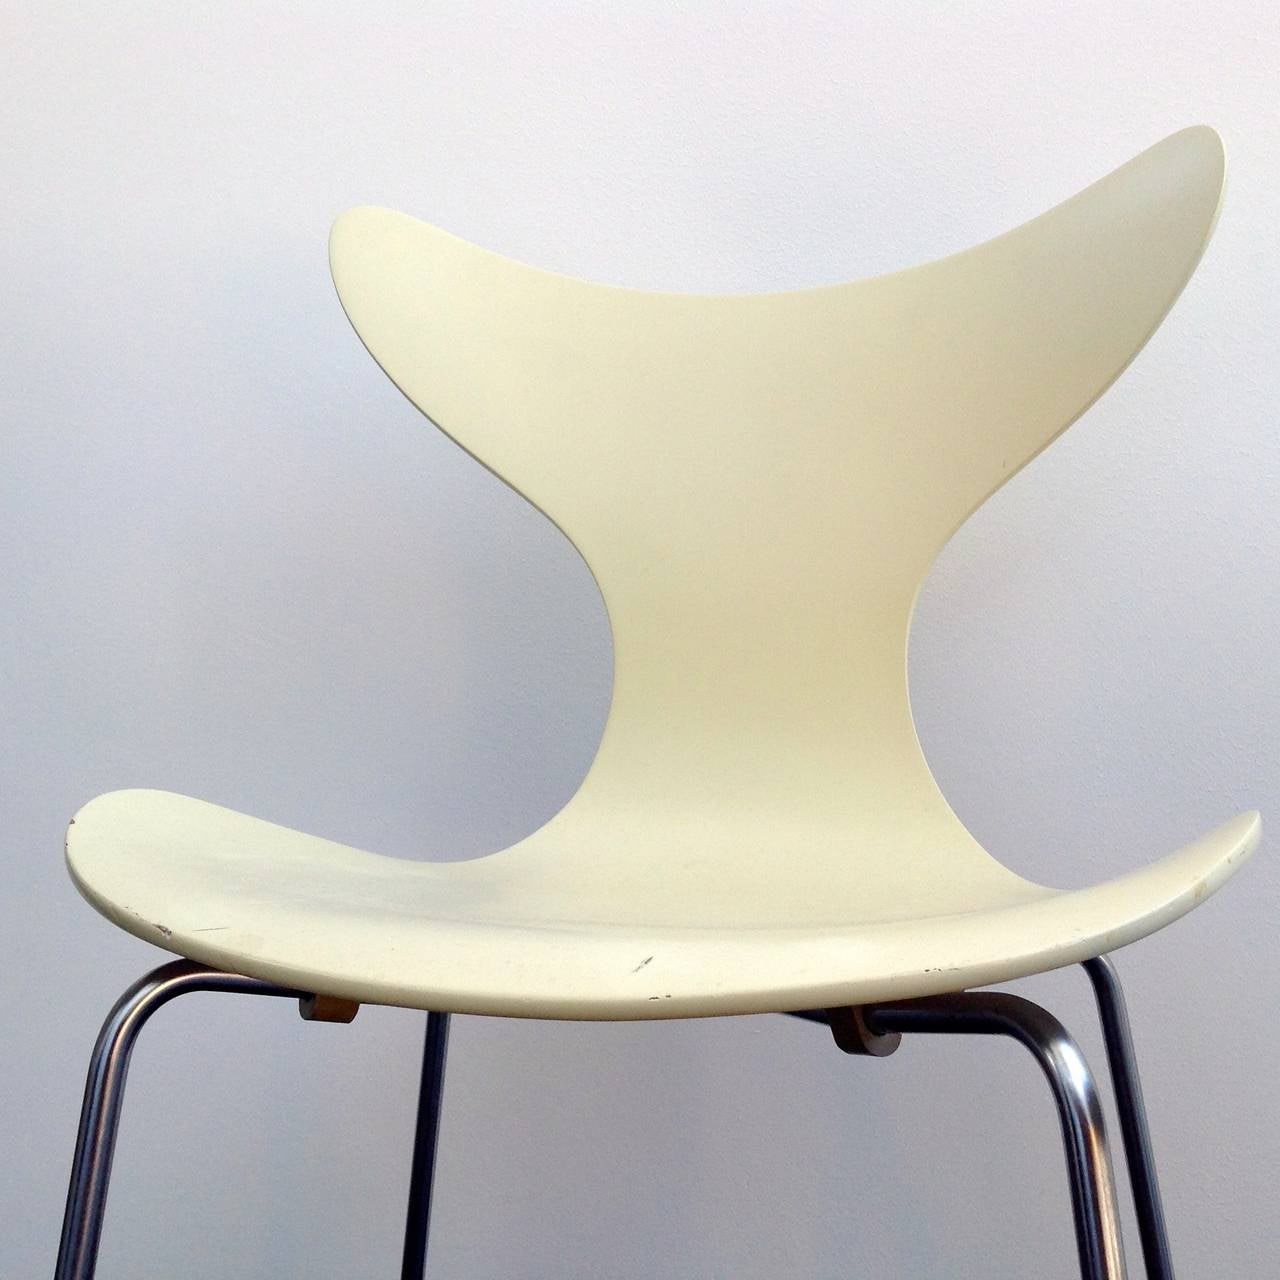 Danish Set of 4 Seagull Chairs by Arne Jacobsen for Fritz Hansen, in original condition